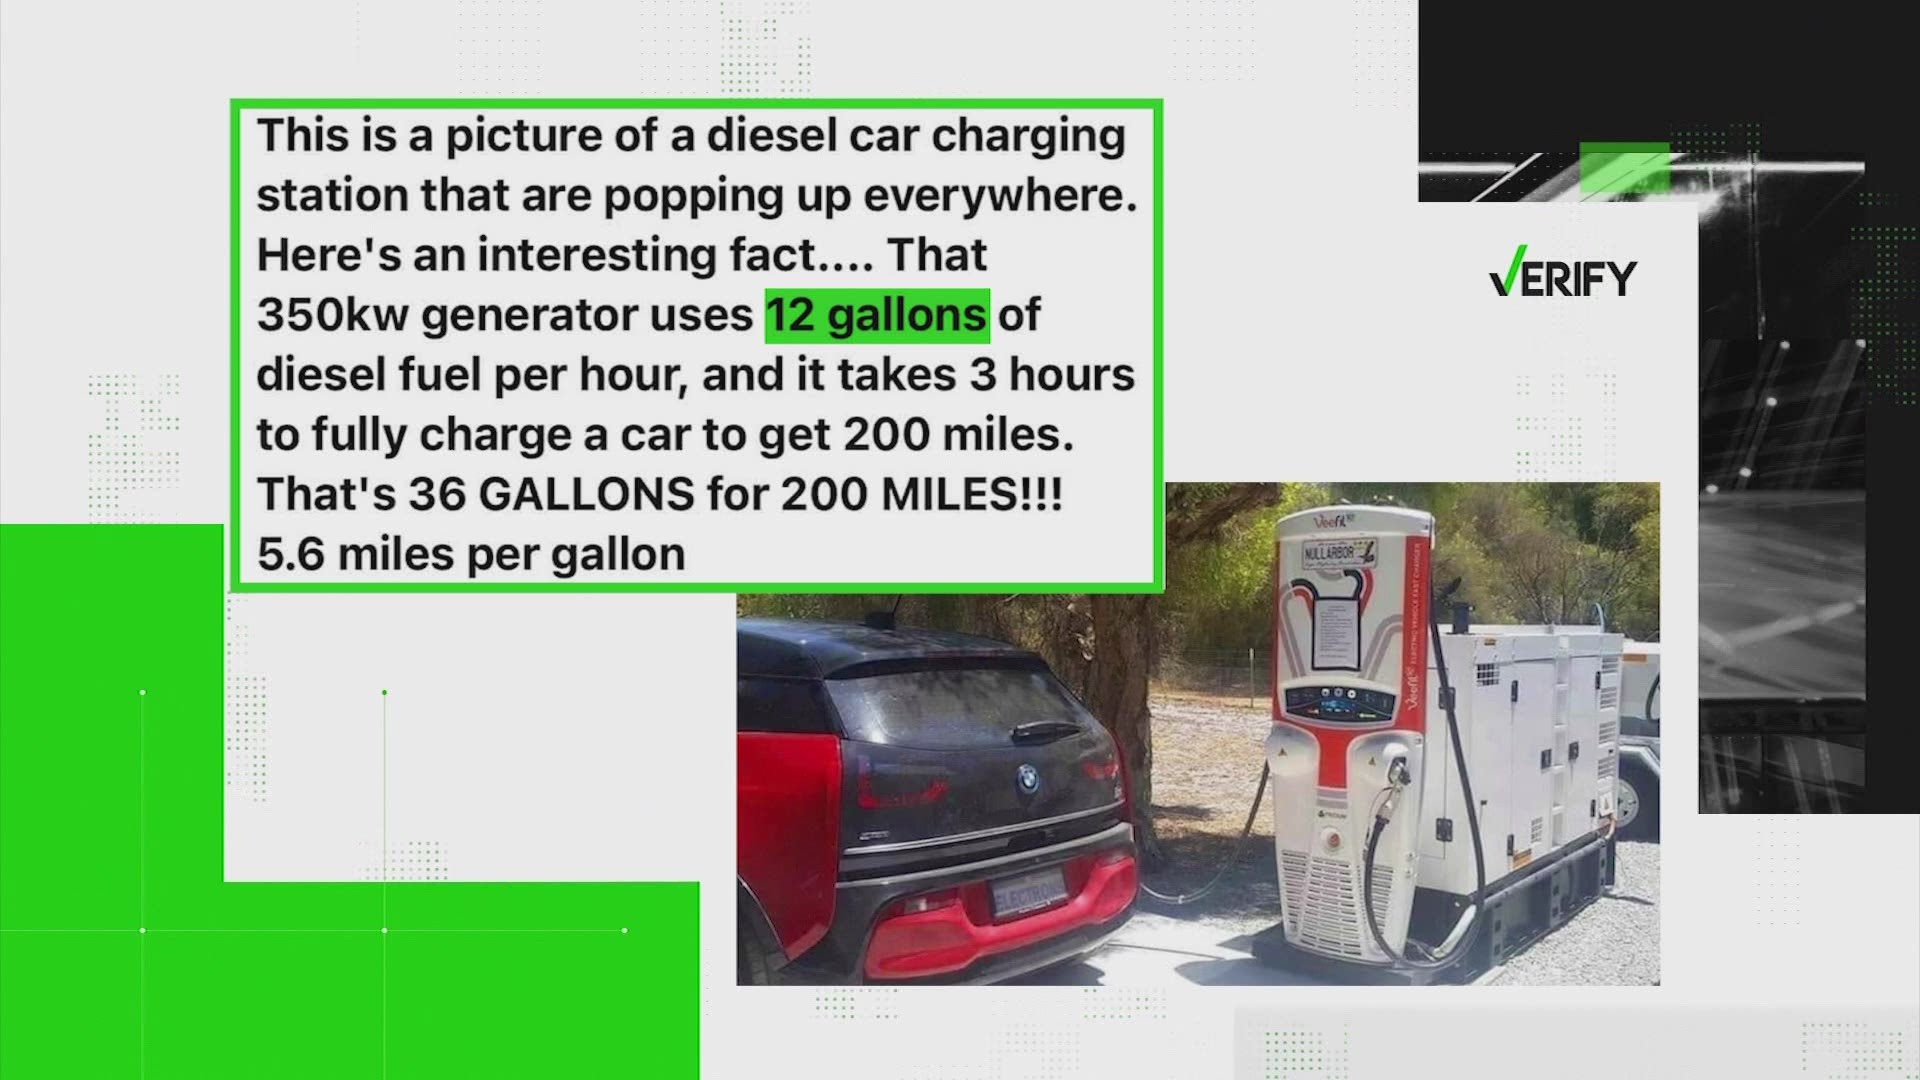 The photo originated from a news article about electric vehicles, but the claim in the social media post is inaccurate.